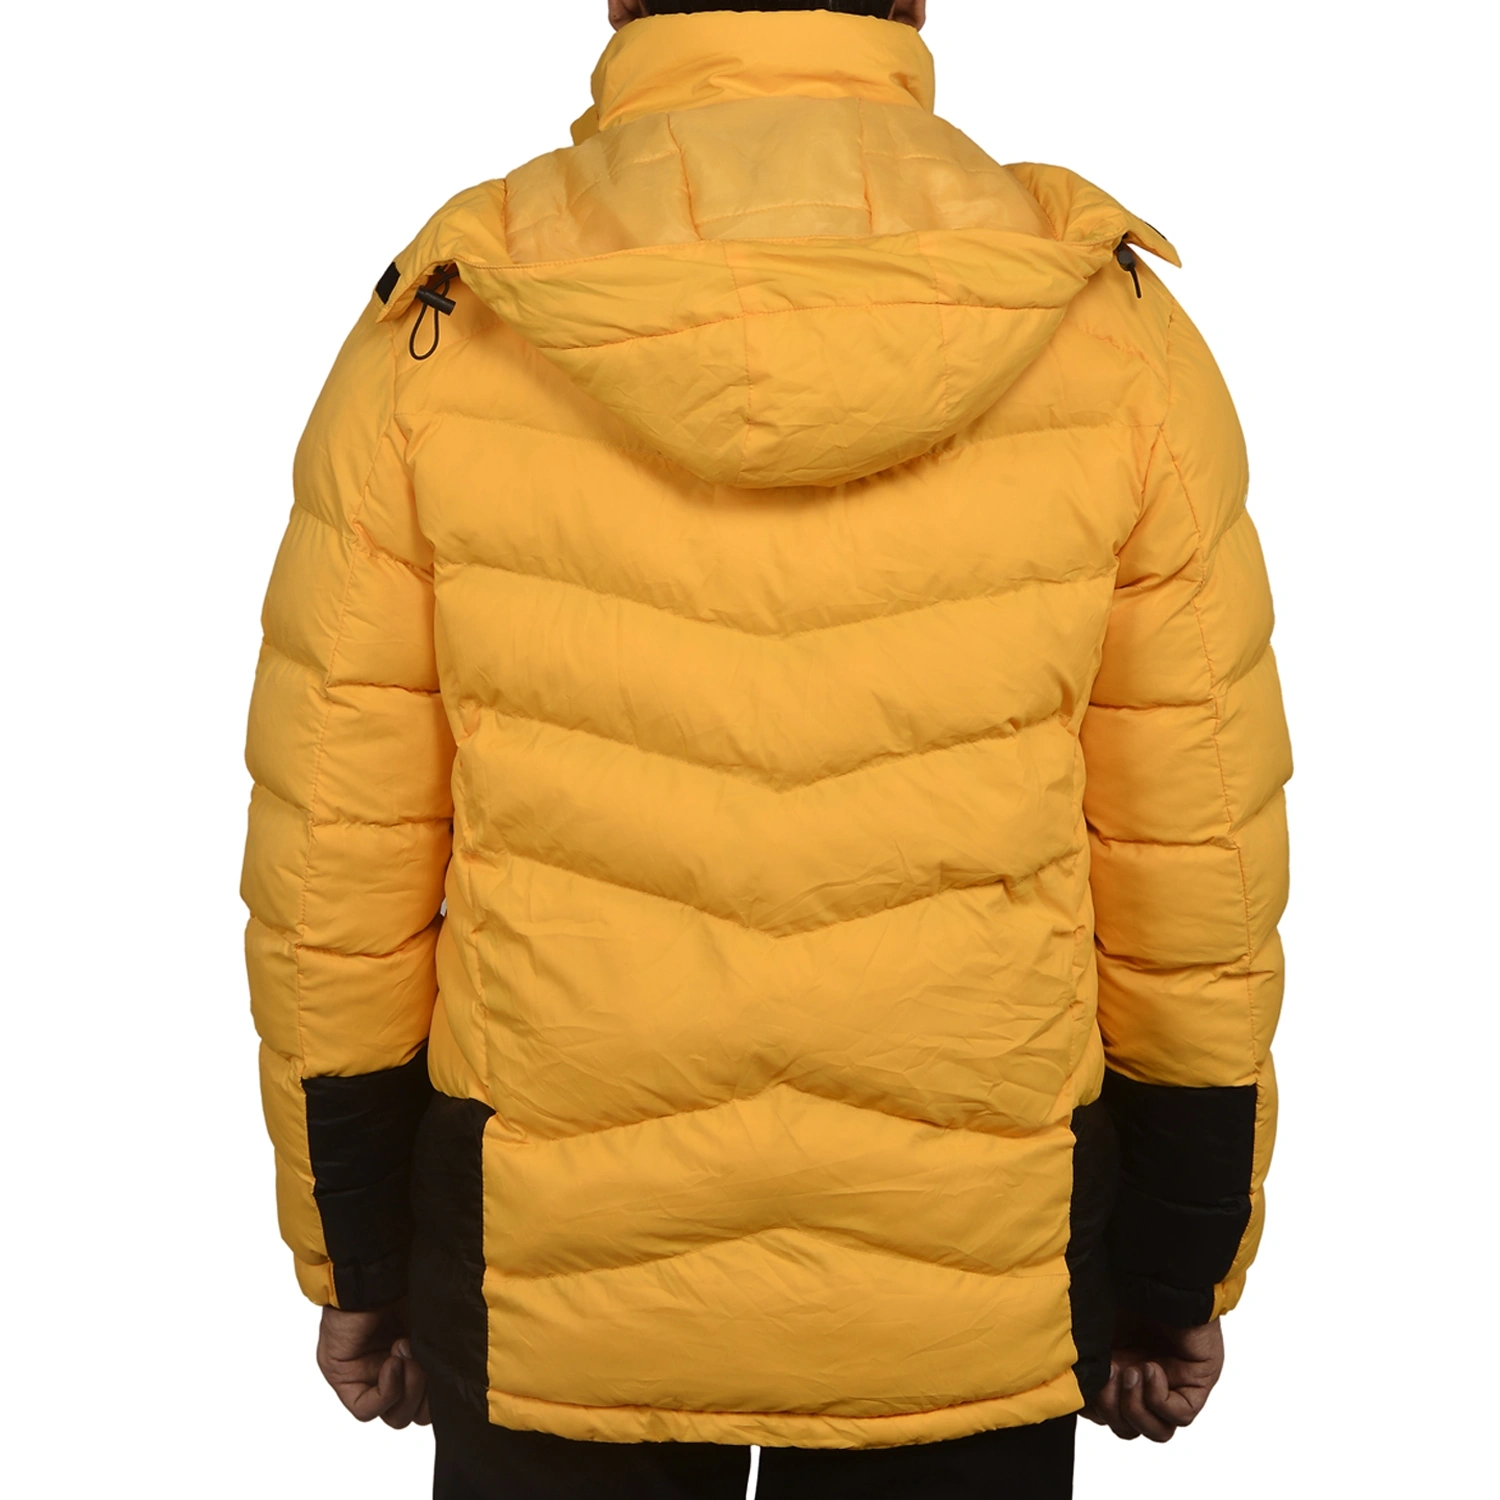 K2 Survivor Down Jacket for Men: Stylized Functionality for Extreme Cold Weather Expeditions (Up to -20°C)-XL-Yellow-4